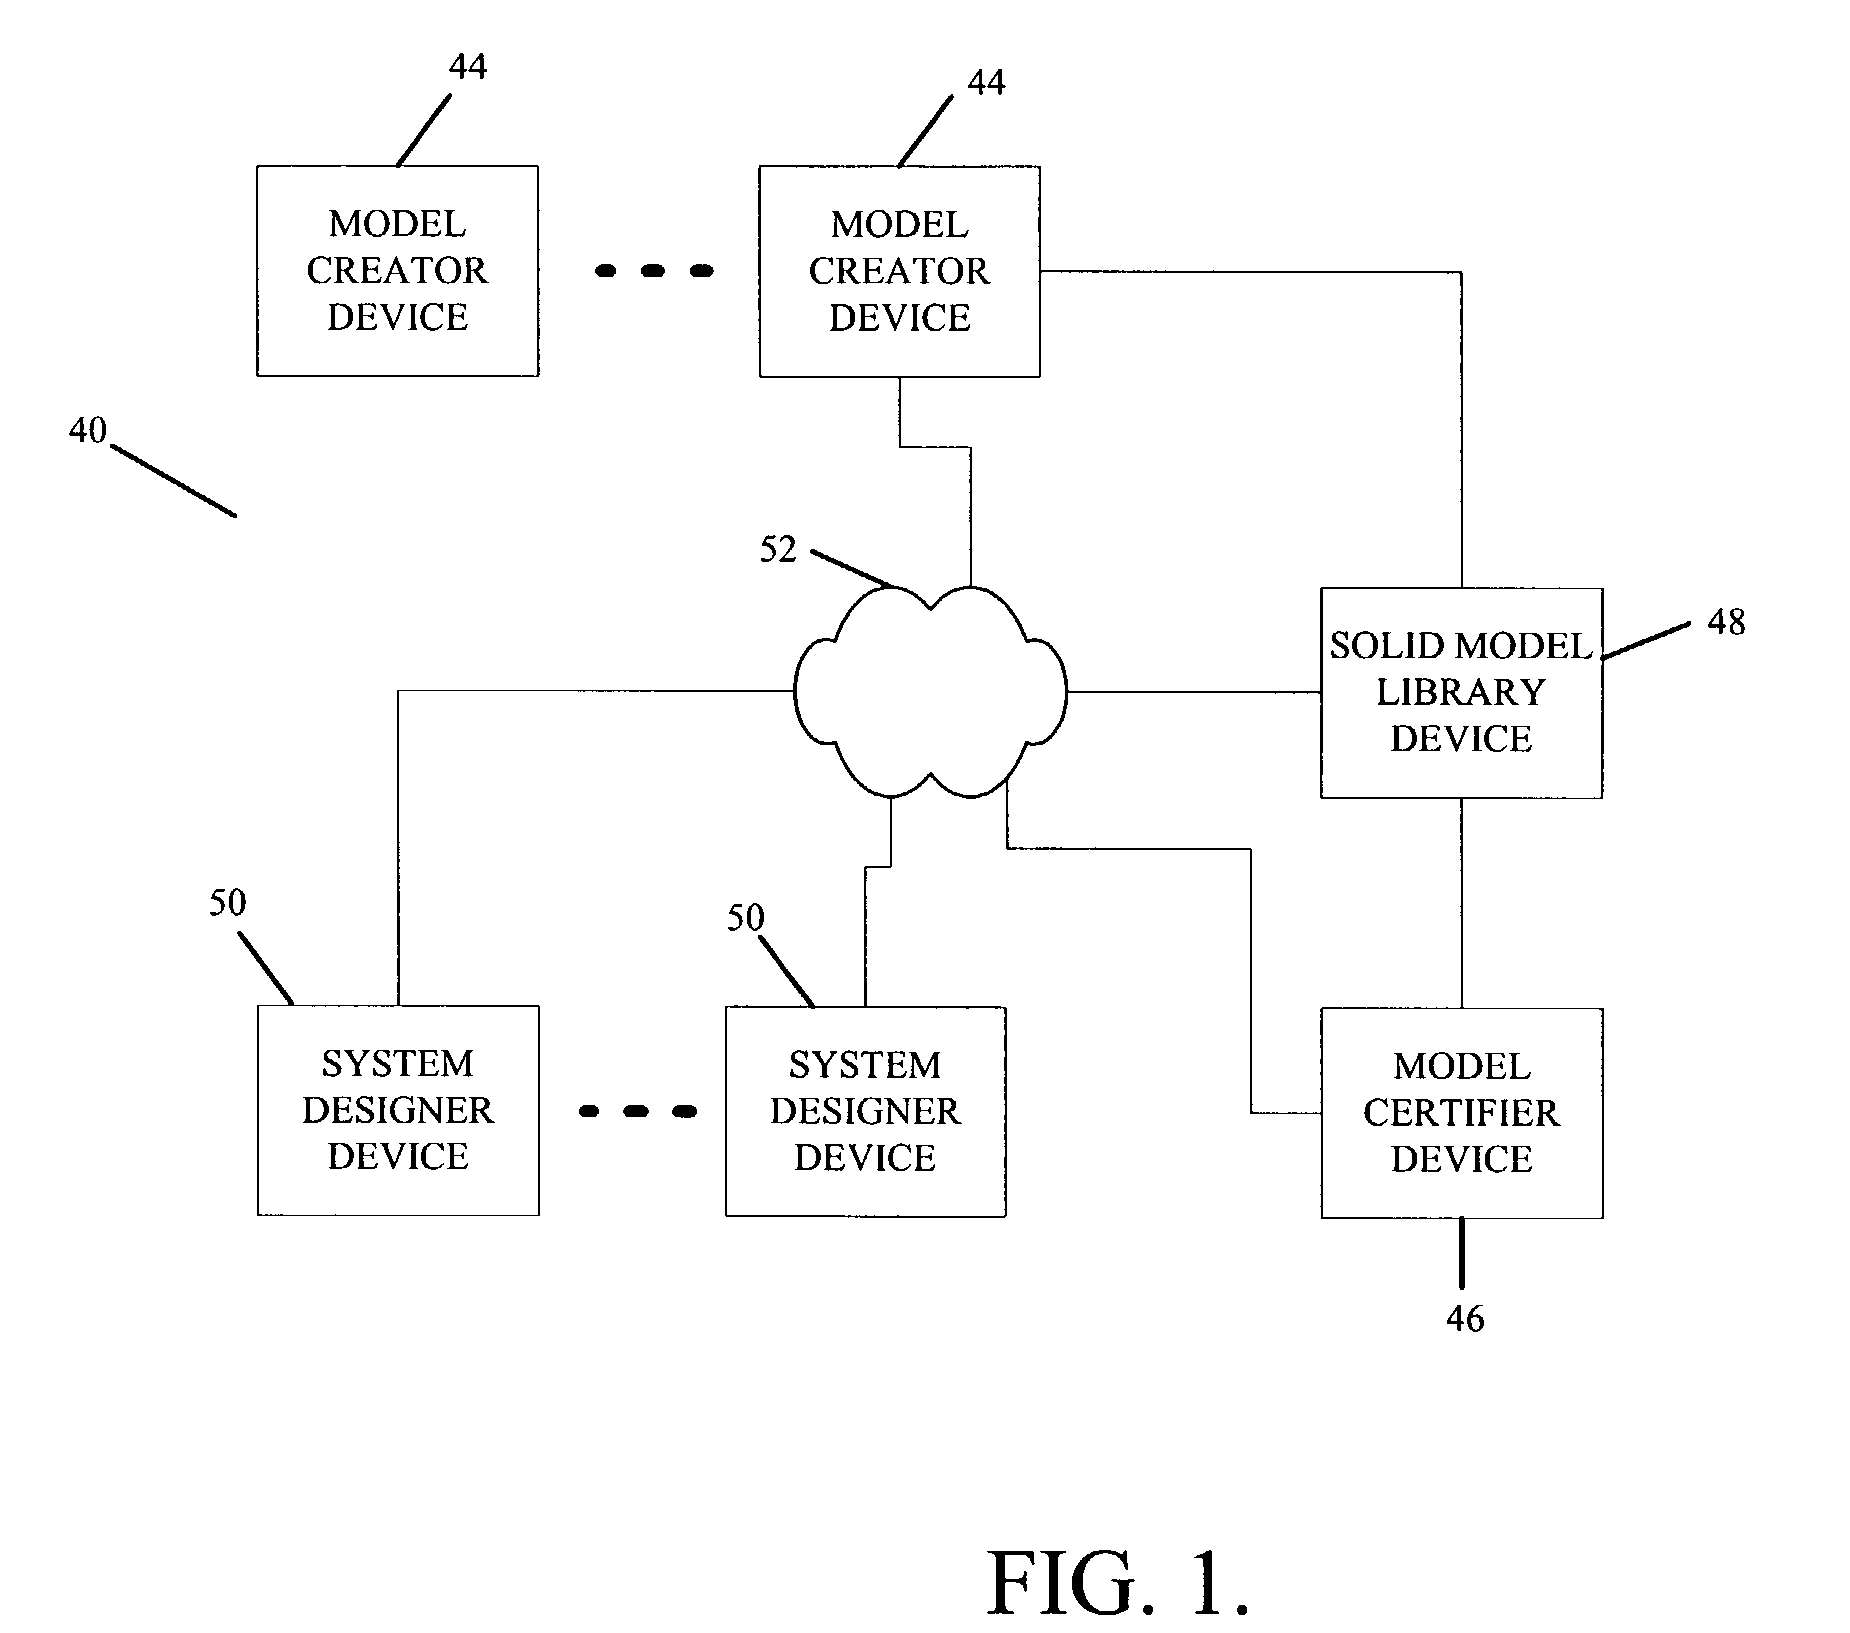 Central based computer network of solid models and associated data with search capability